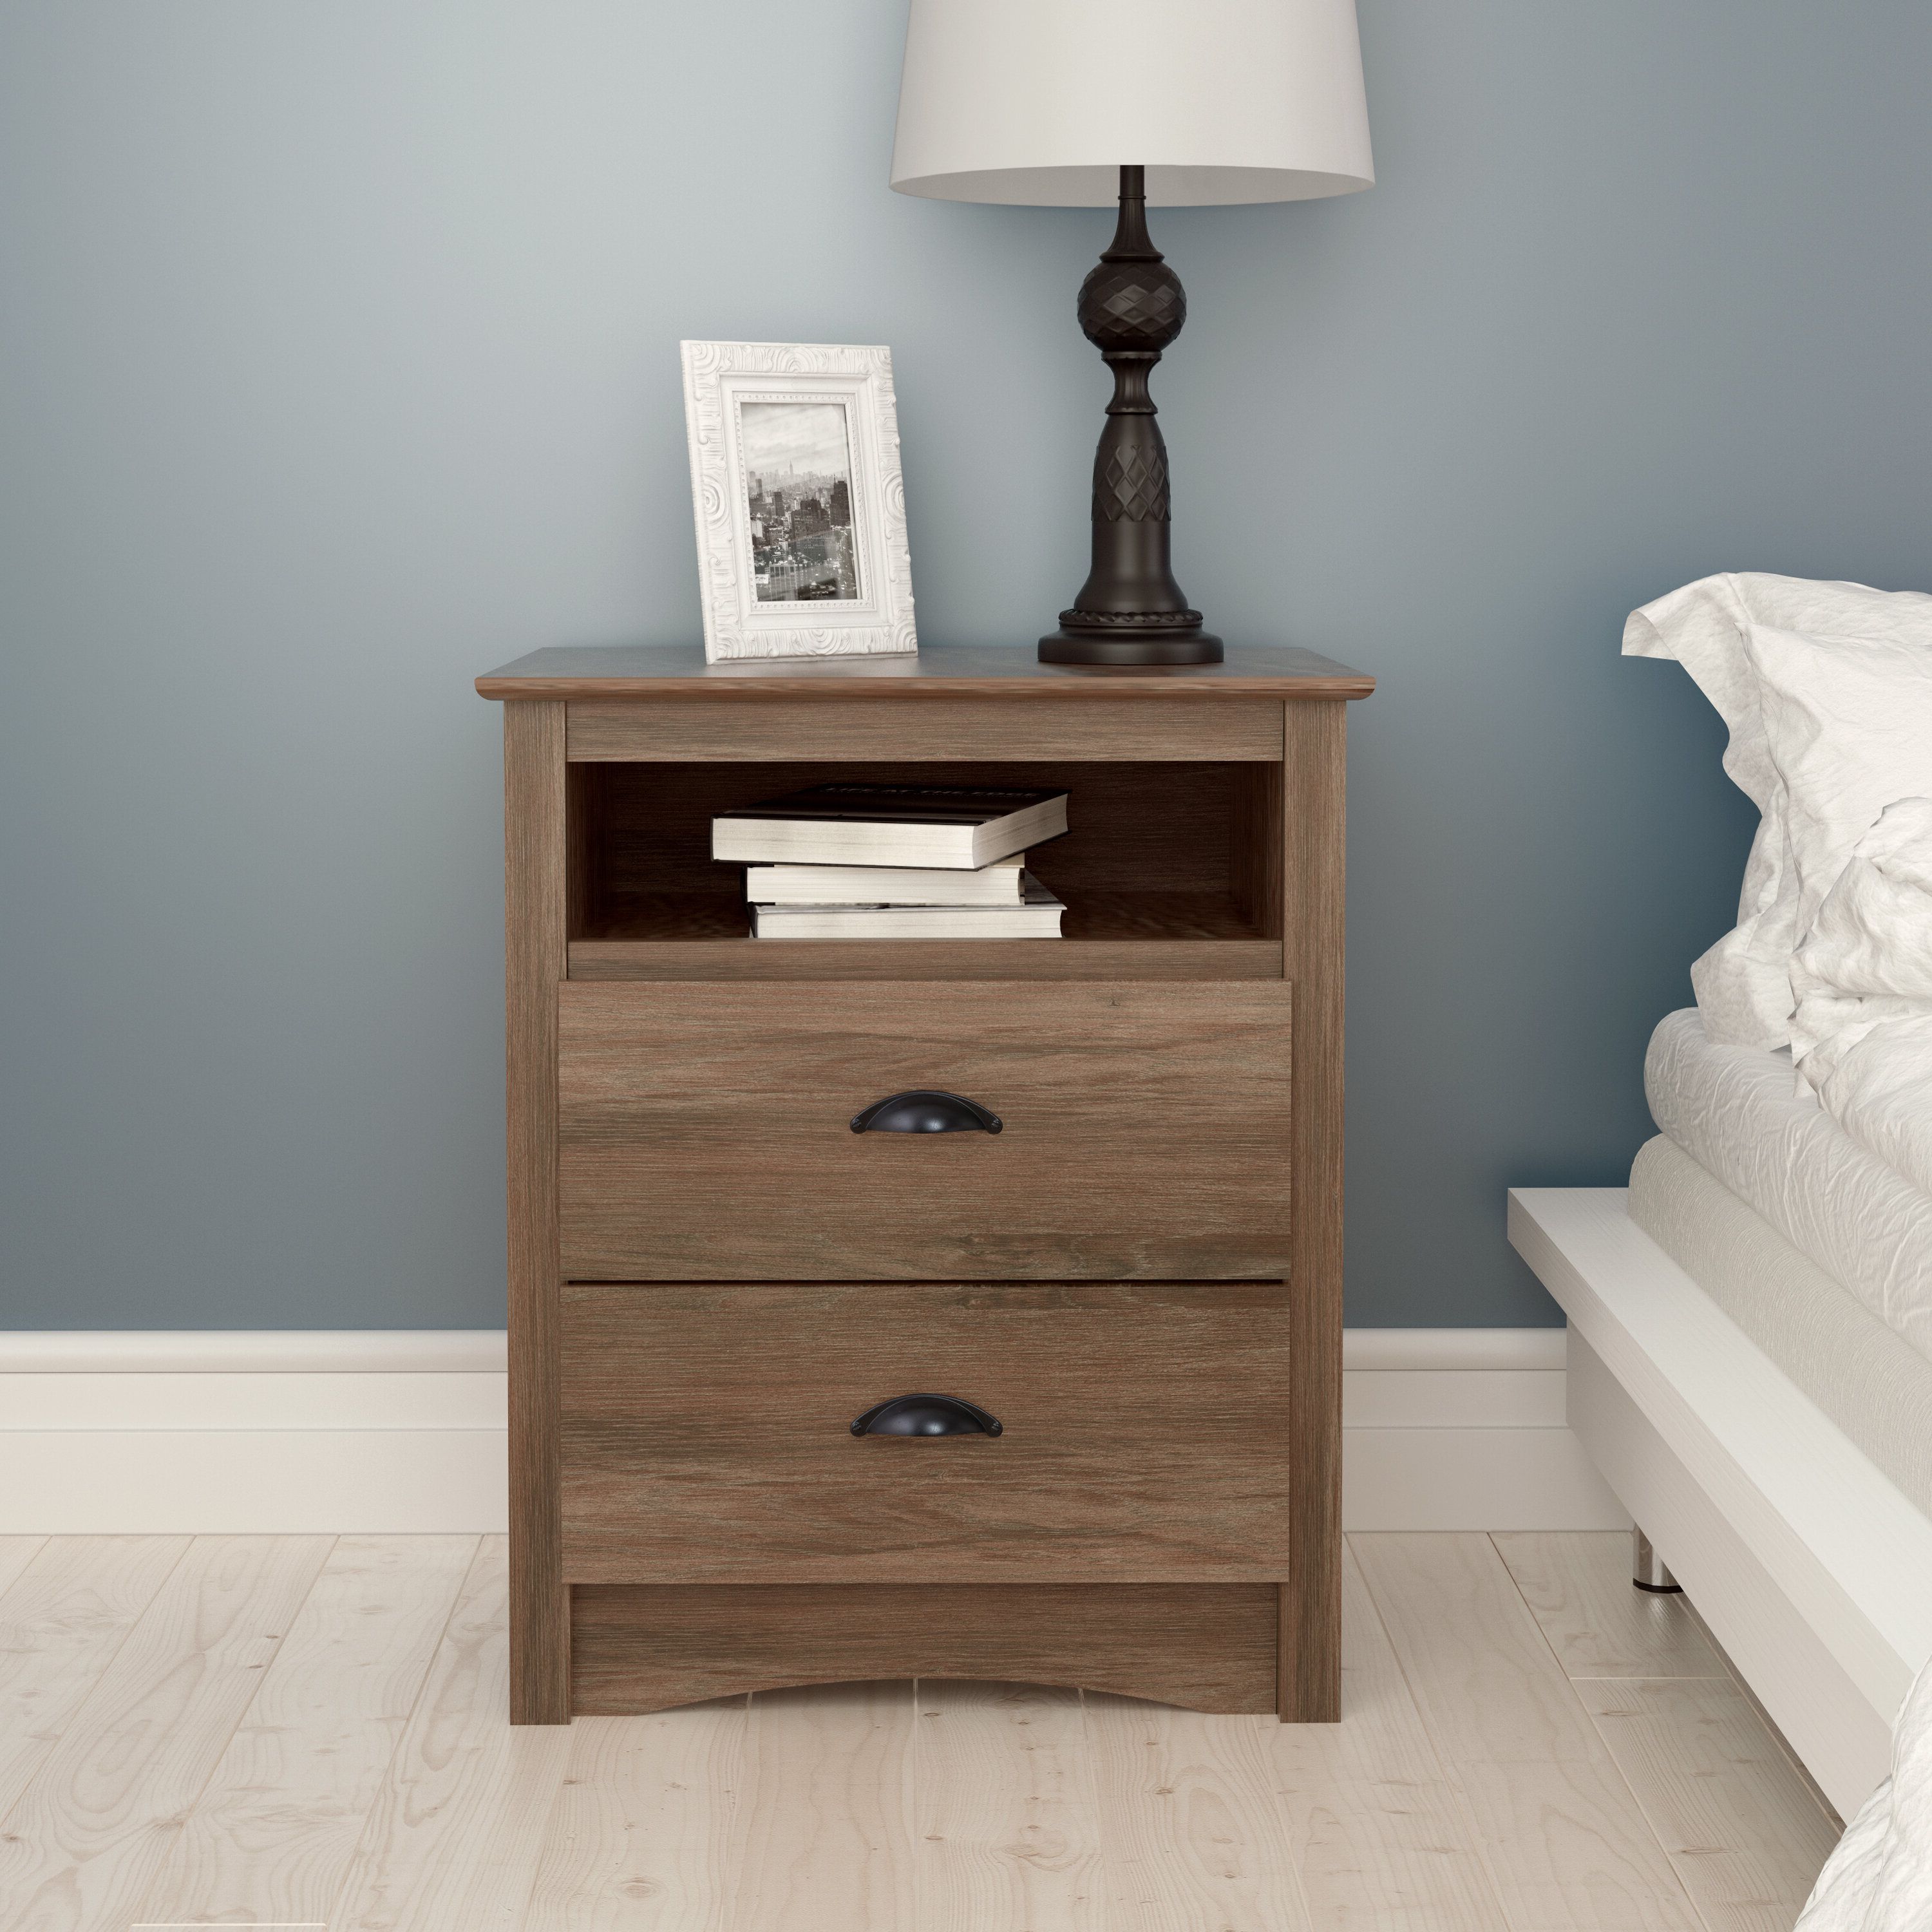 Diamondville Modern & Contemporary Distressed Accent Mirrors Intended For 2020 Nelda 2 Drawer Nightstand (View 10 of 20)